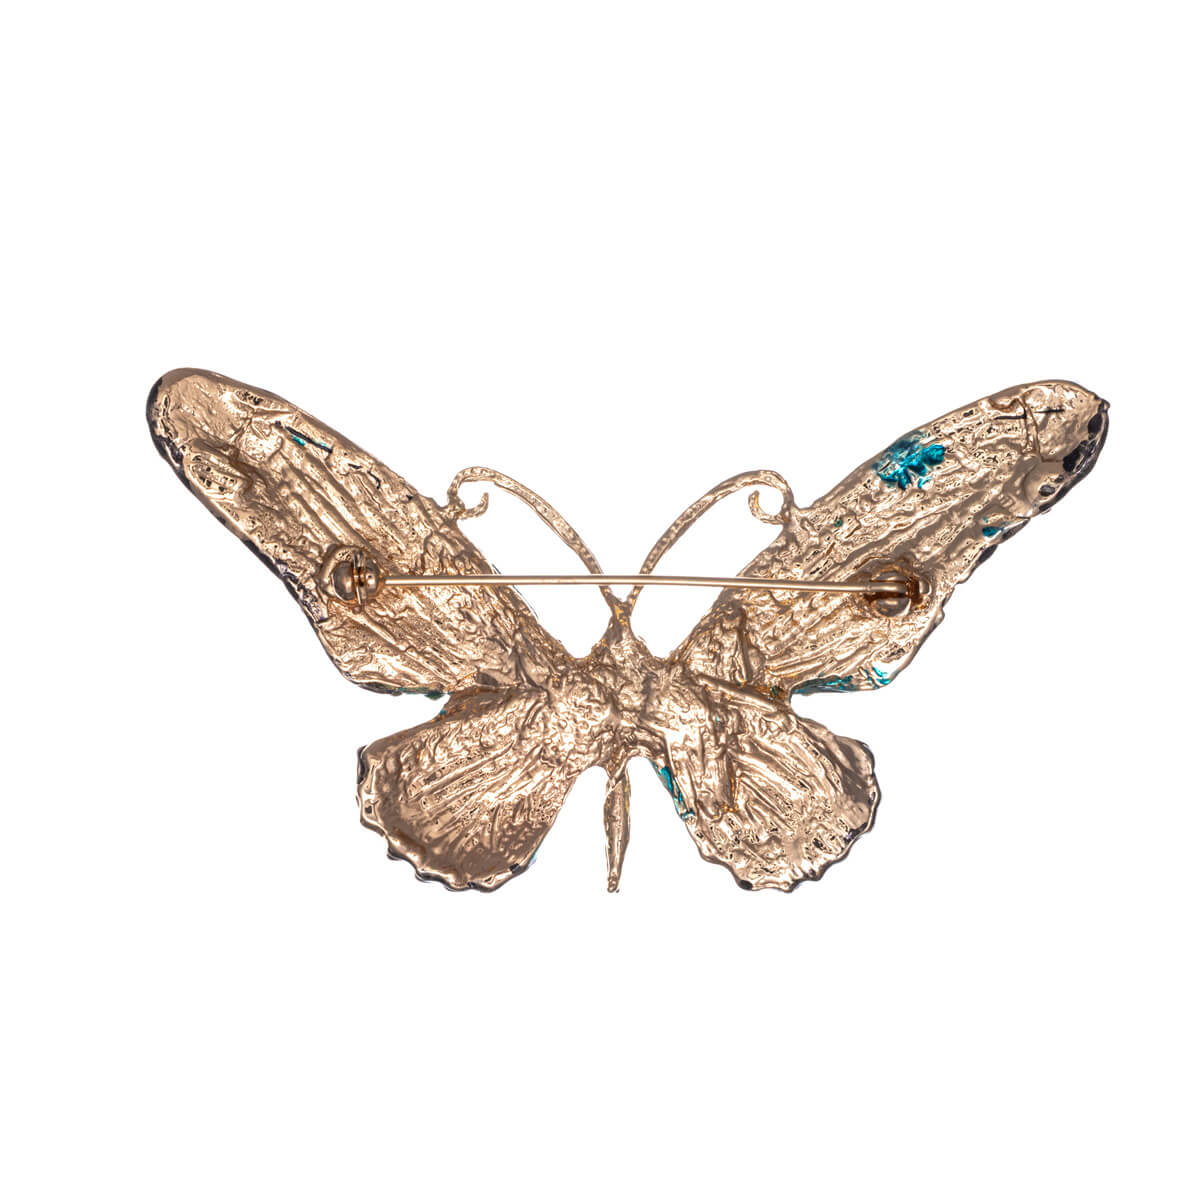 Sparkling butterfly brooch with glass stones